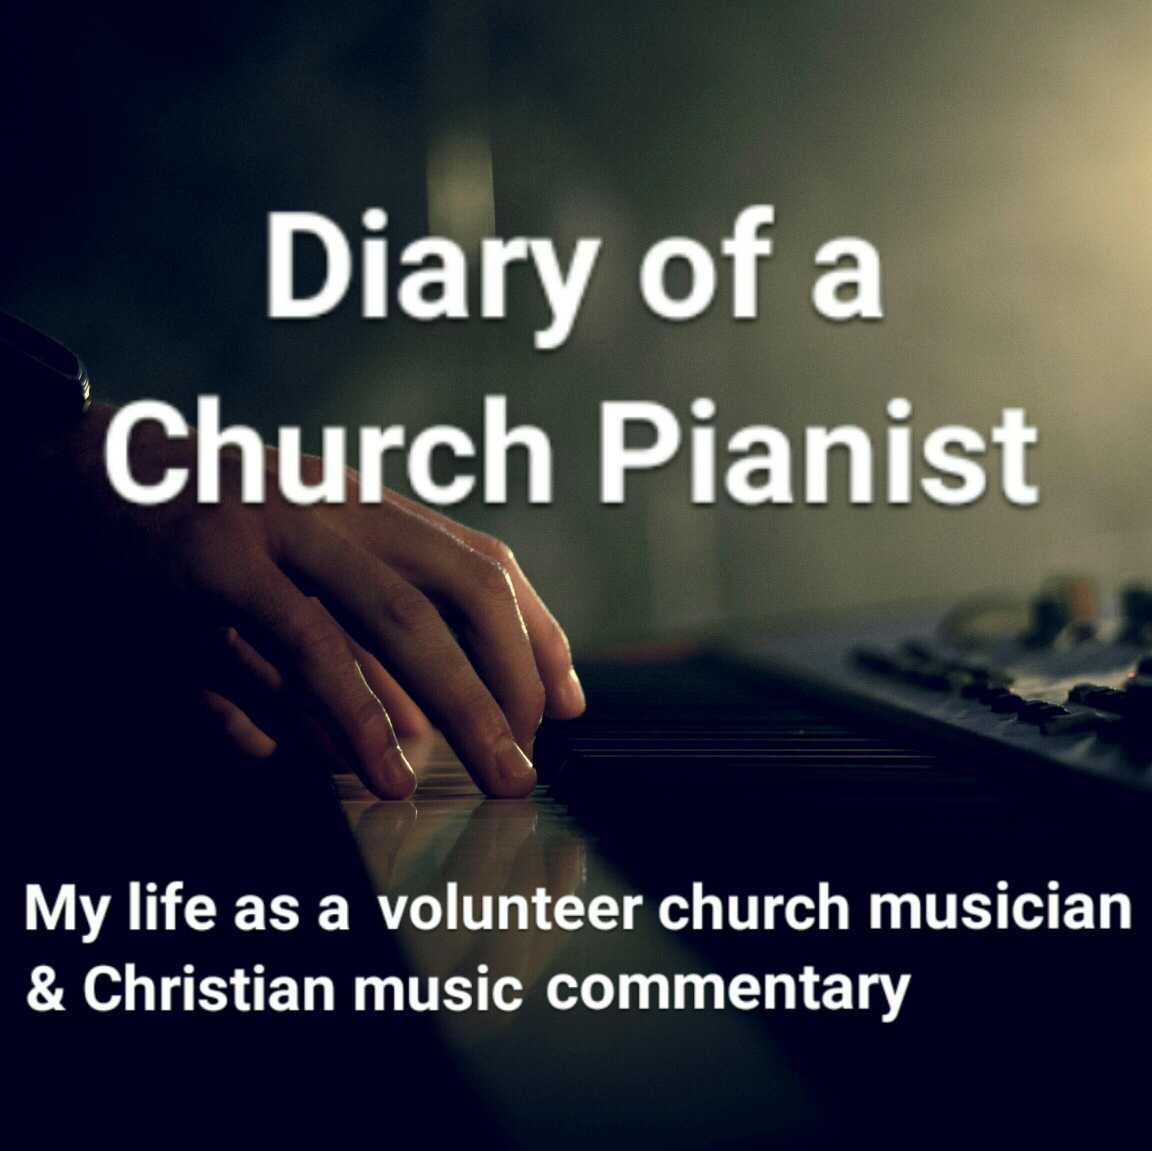 Diary of a Church Pianist